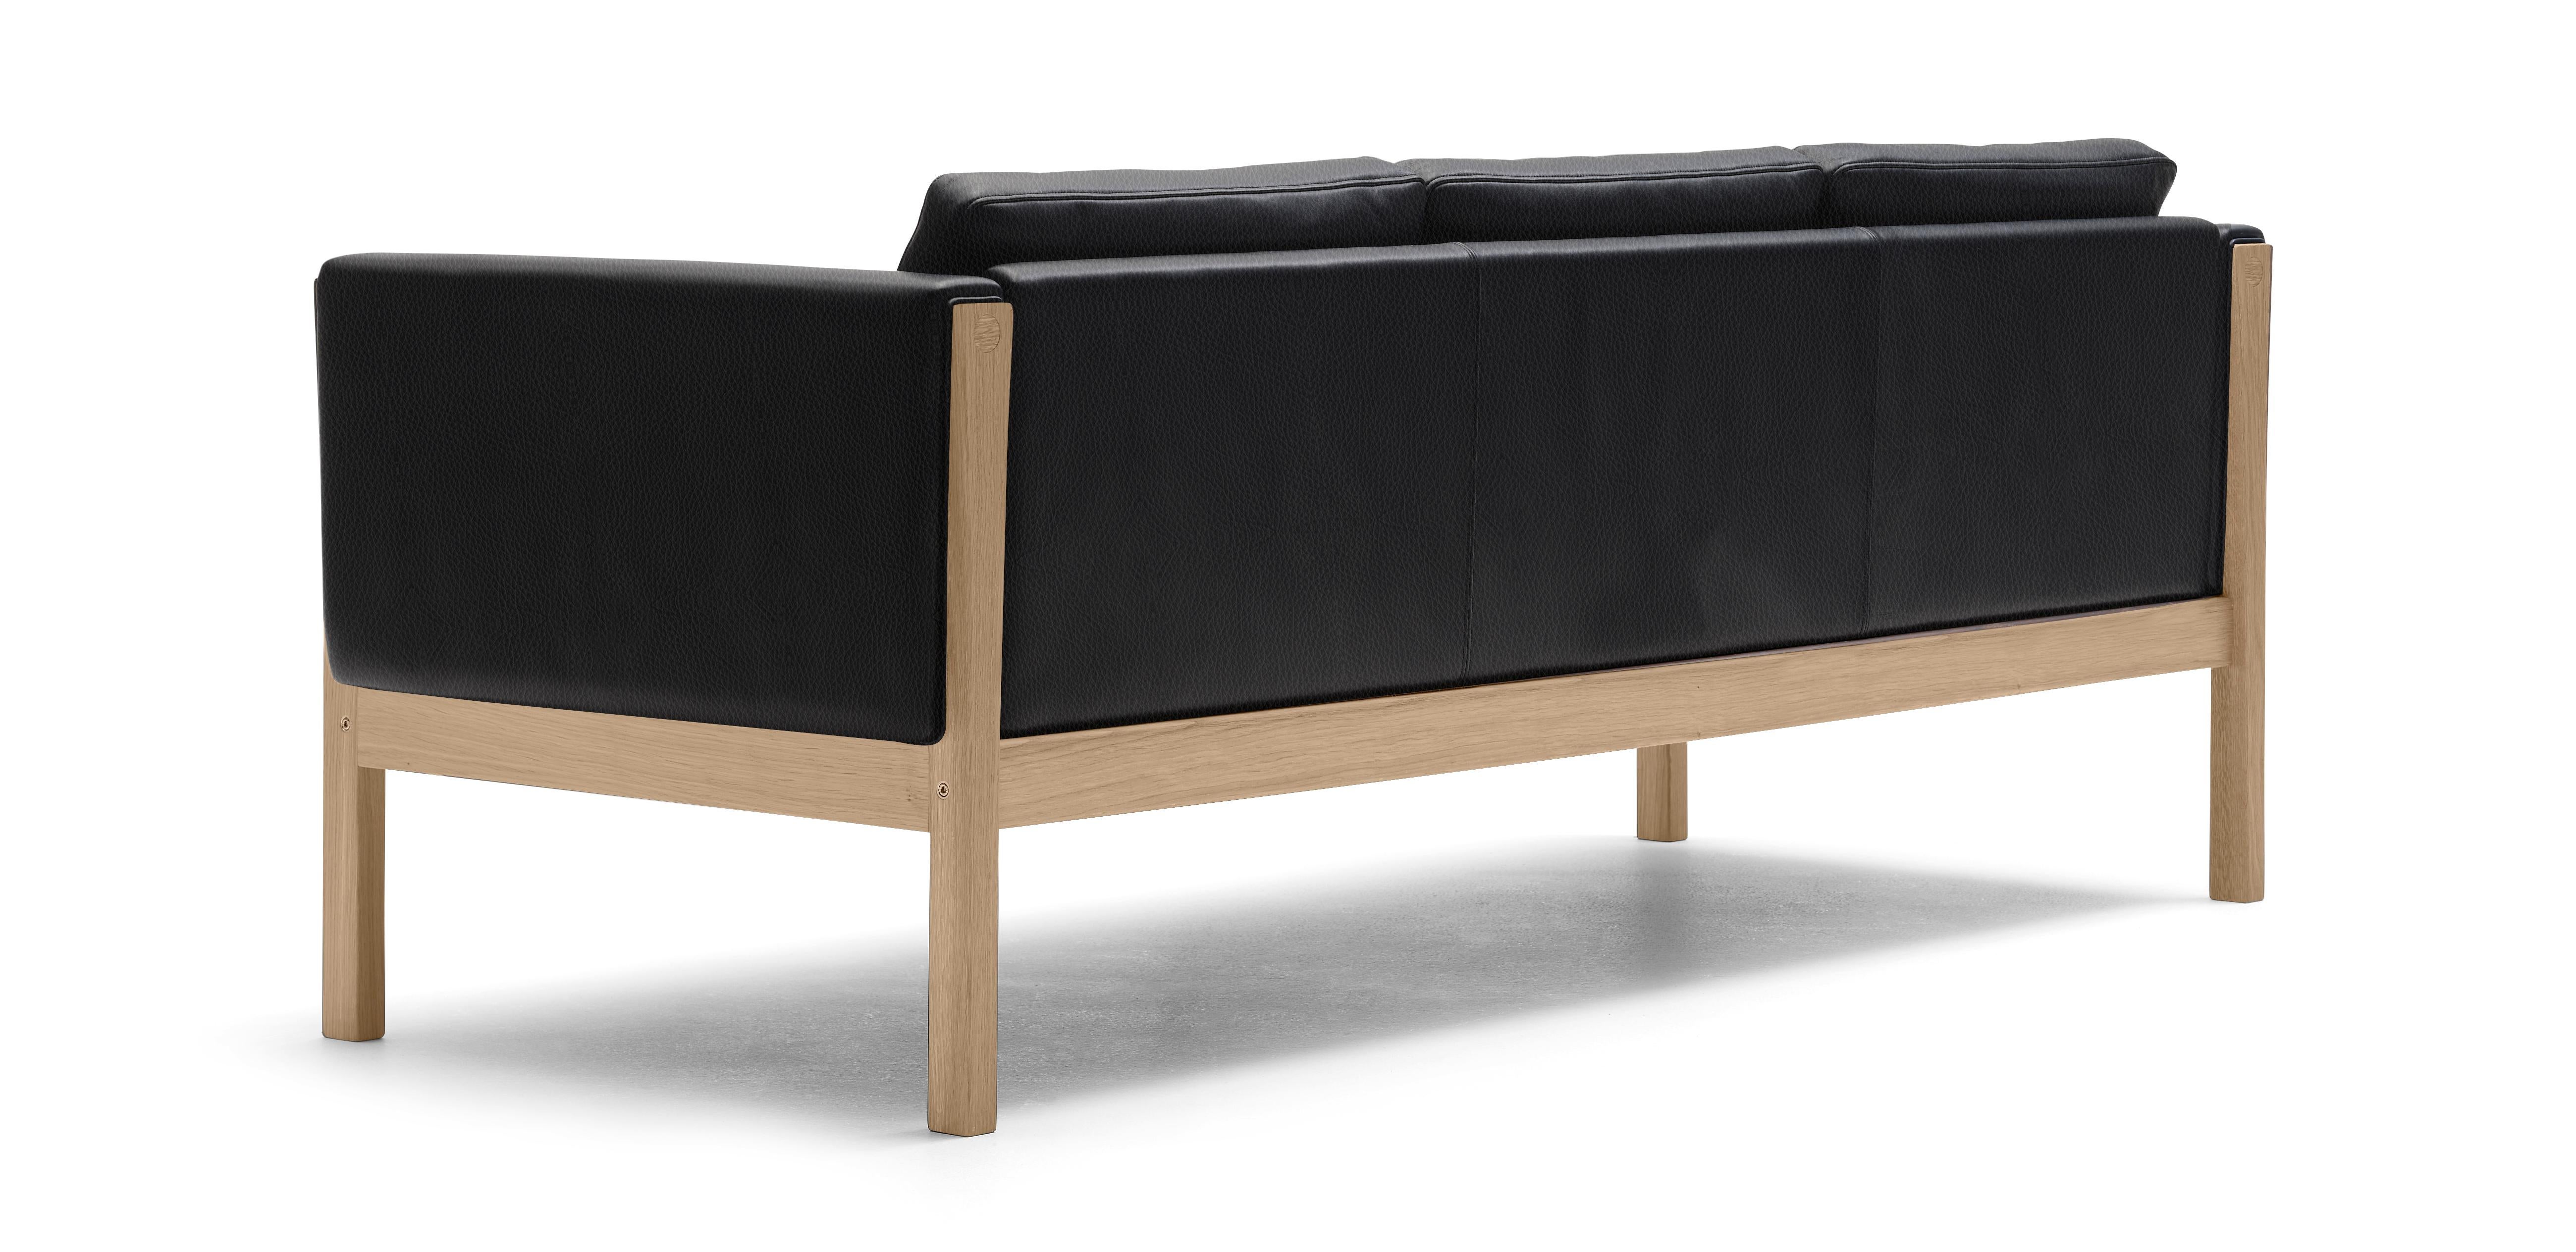 Black (Thor 301) CH163 Sofa in Oiled Oak Frame with Leather Upholstery by Hans J. Wegner 3